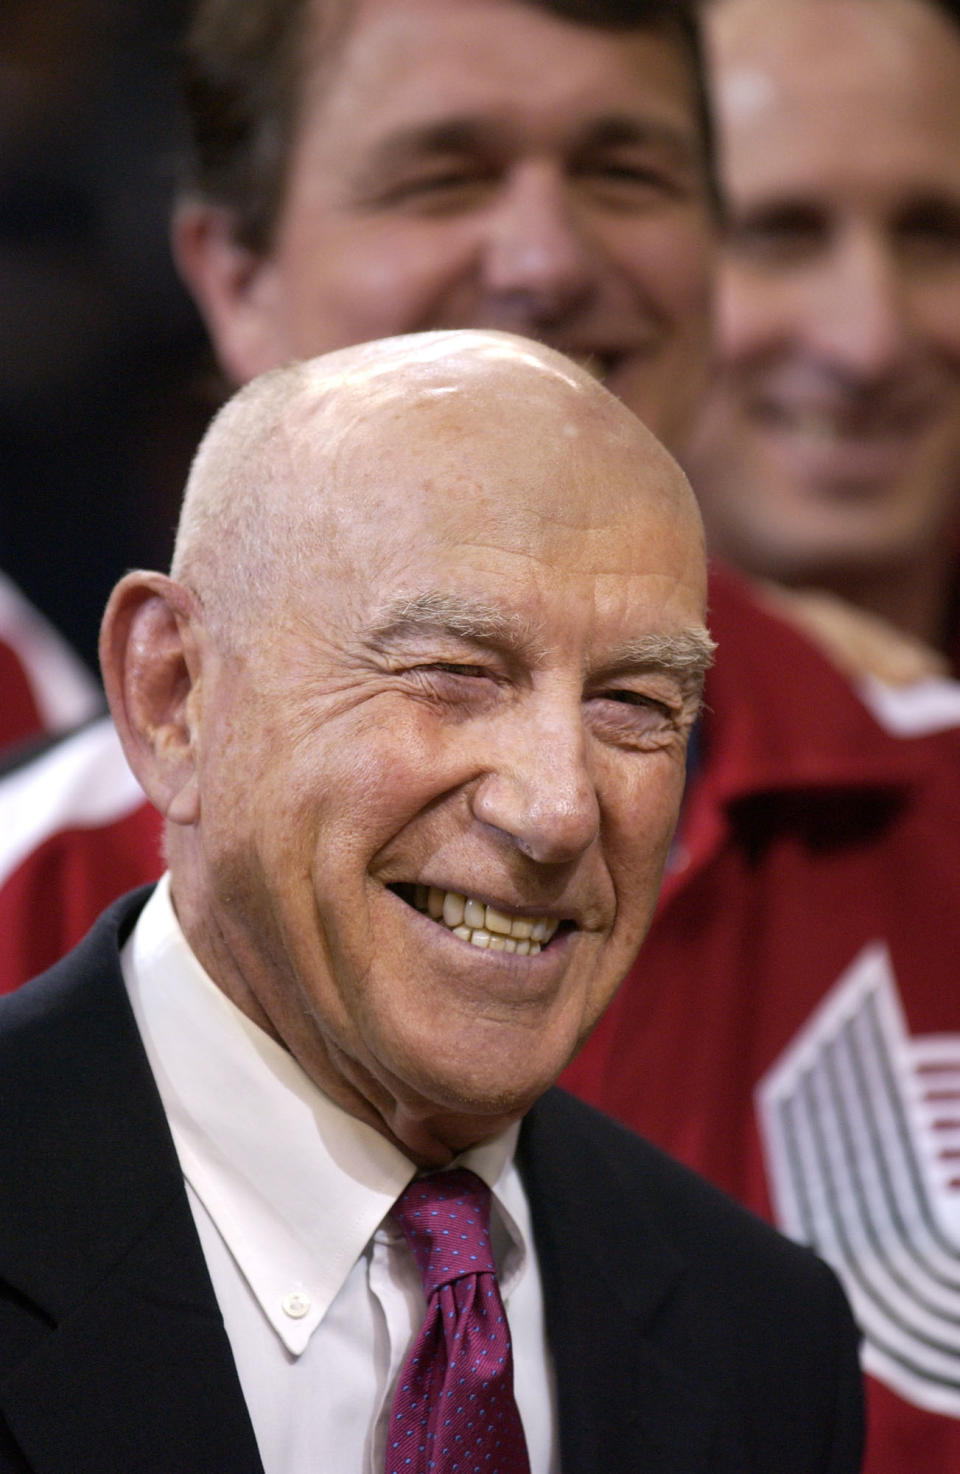 FILE - In this Sunday, April, 14, 2002, file photo, former Portland Trail Blazers coach Jack Ramsay smiles during a special 25th anniversary reunion of the Trail Blazers' 1976-77 championship team at halftime of their NBA basketball game against the Los Angeles Lakers, in Portland, Ore. Ramsay, a Hall of Fame coach who led the Portland Trail Blazers to the 1977 NBA championship before he became one of the league's most respected broadcasters, has died following a long battle with cancer. He was 89. (AP Photo/Shane Young, File)